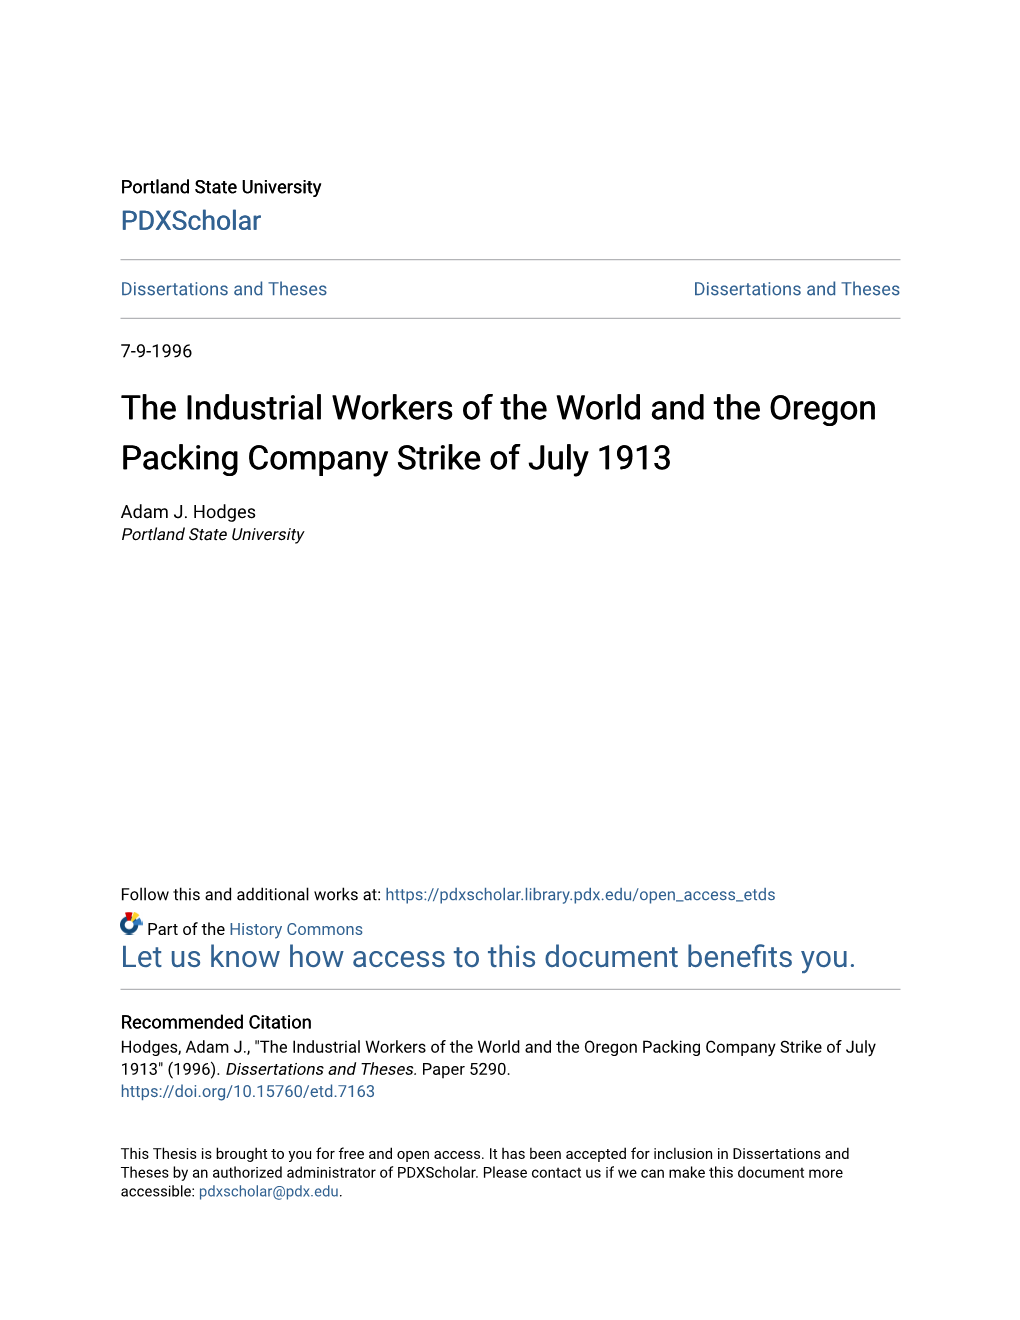 The Industrial Workers of the World and the Oregon Packing Company Strike of July 1913